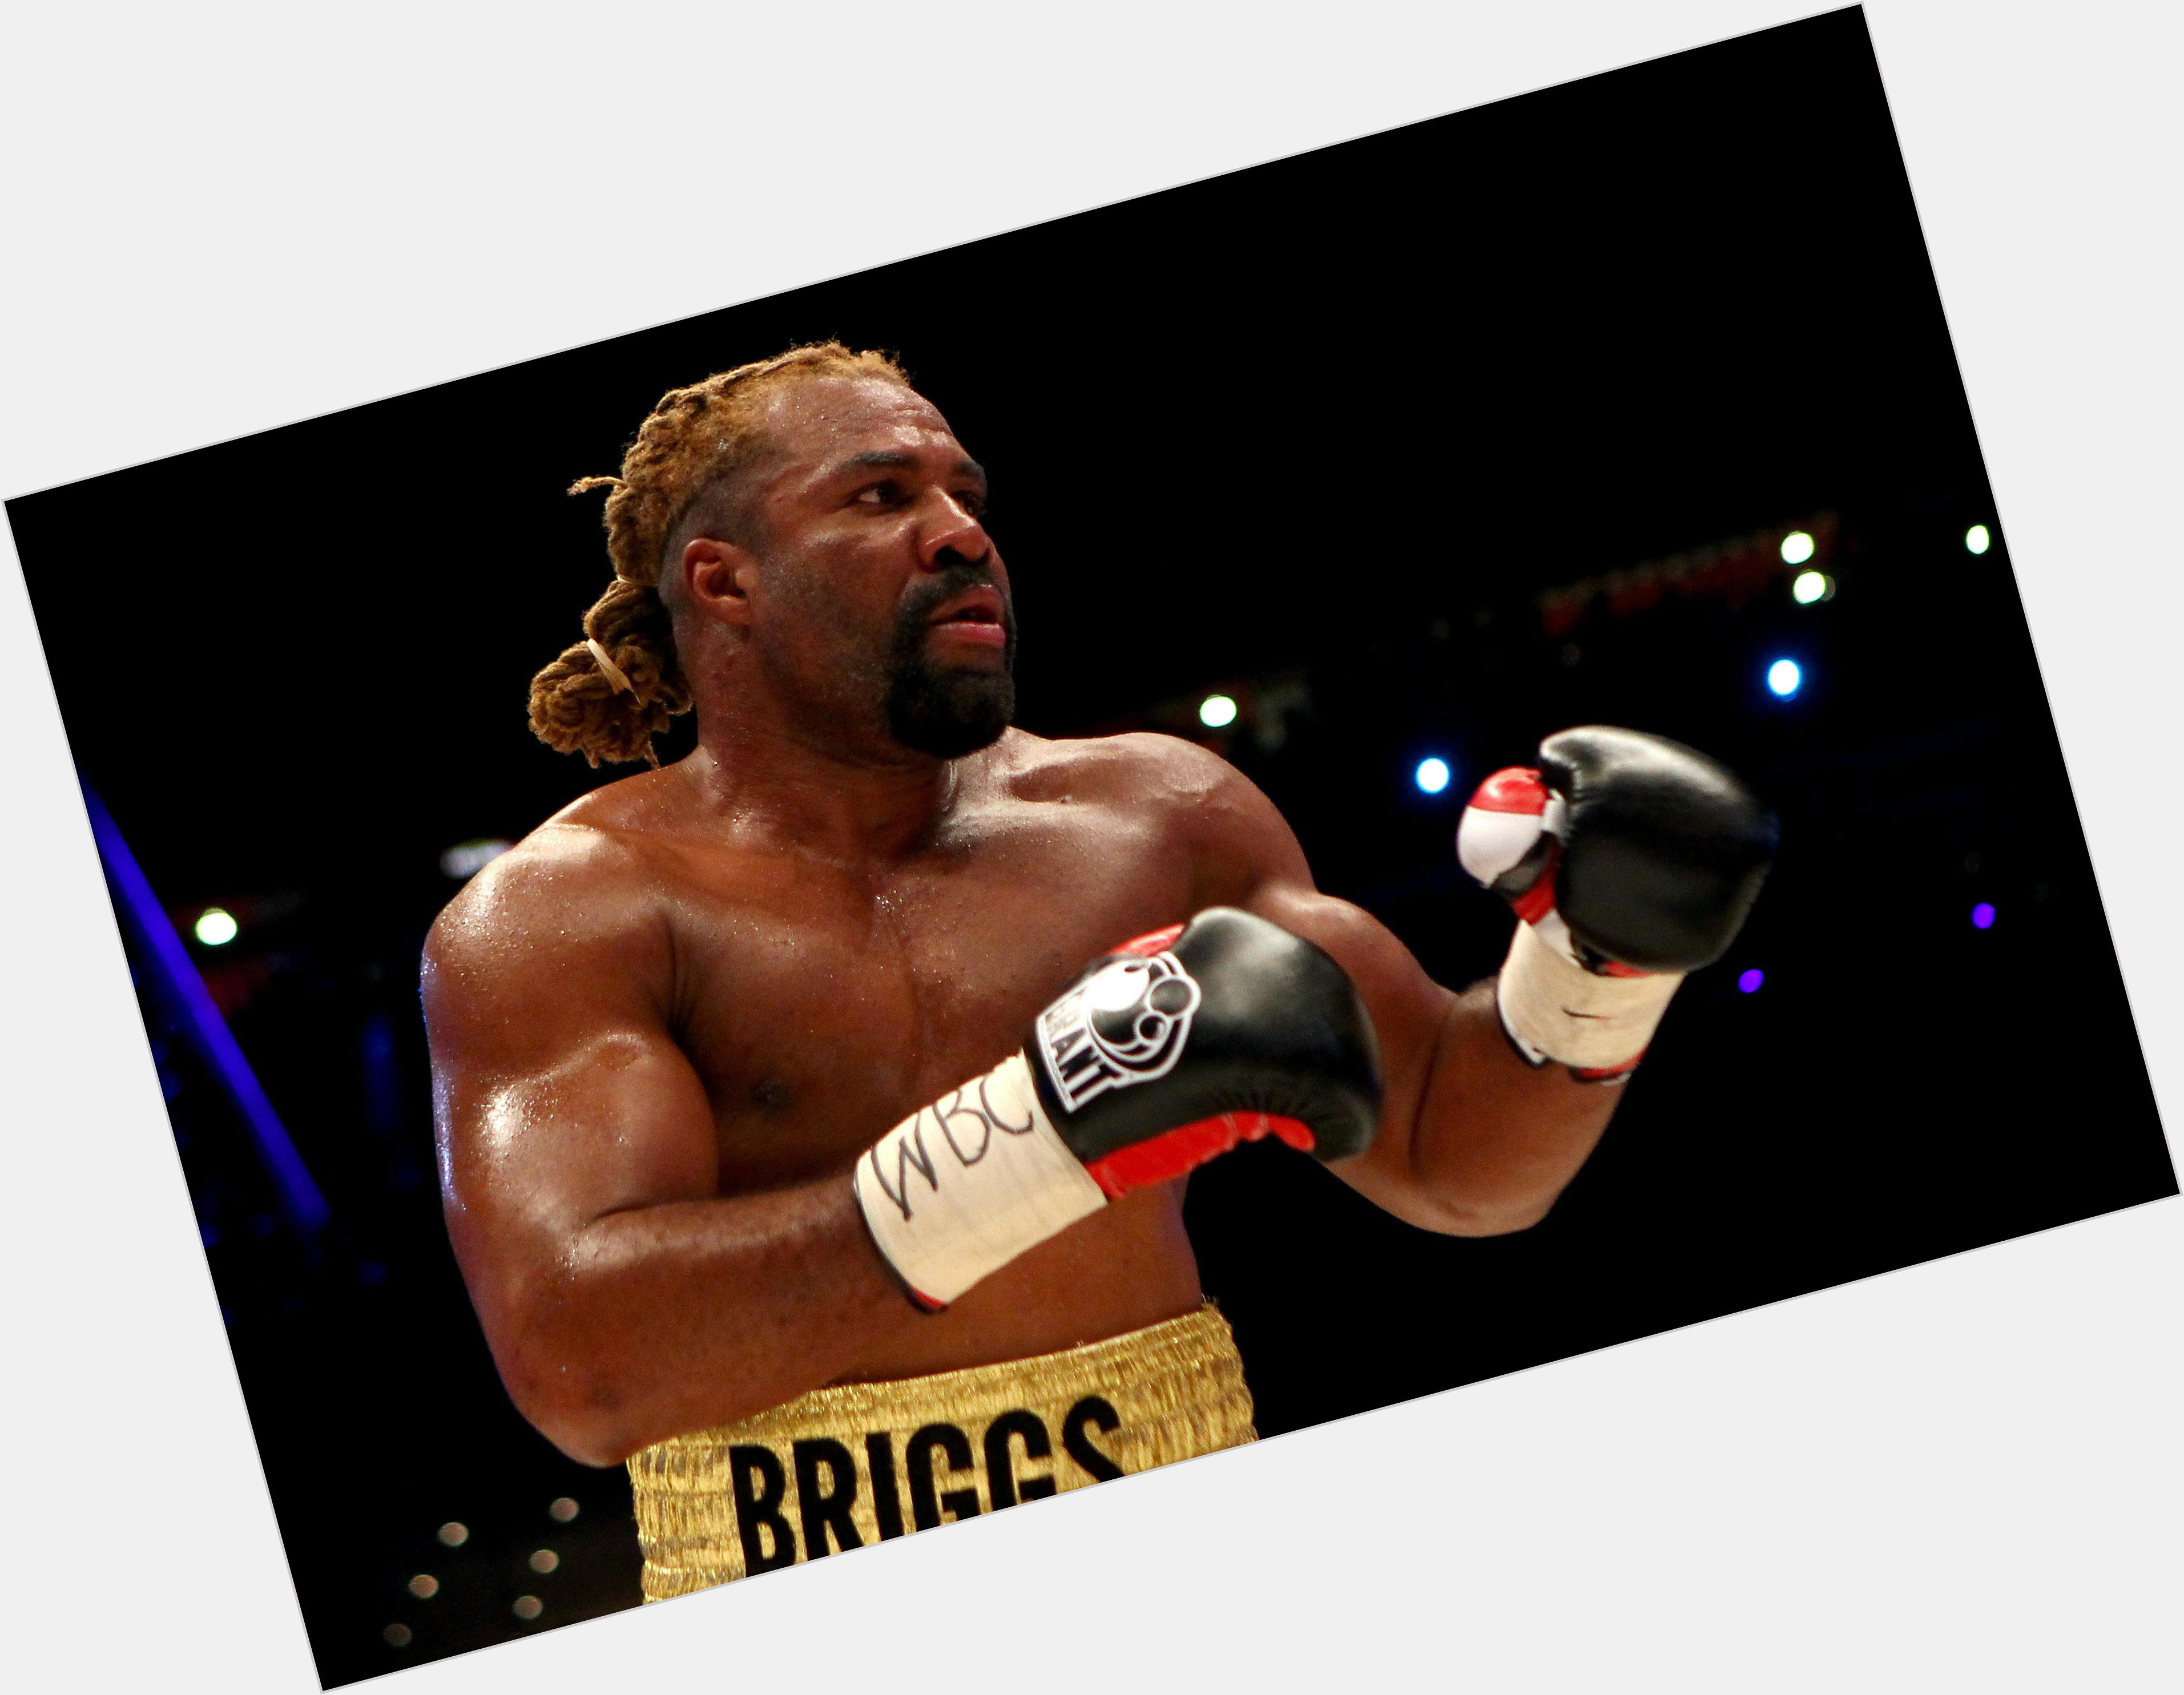 <a href="/hot-men/shannon-briggs/where-dating-news-photos">Shannon Briggs</a> Athletic body,  blonde hair & hairstyles